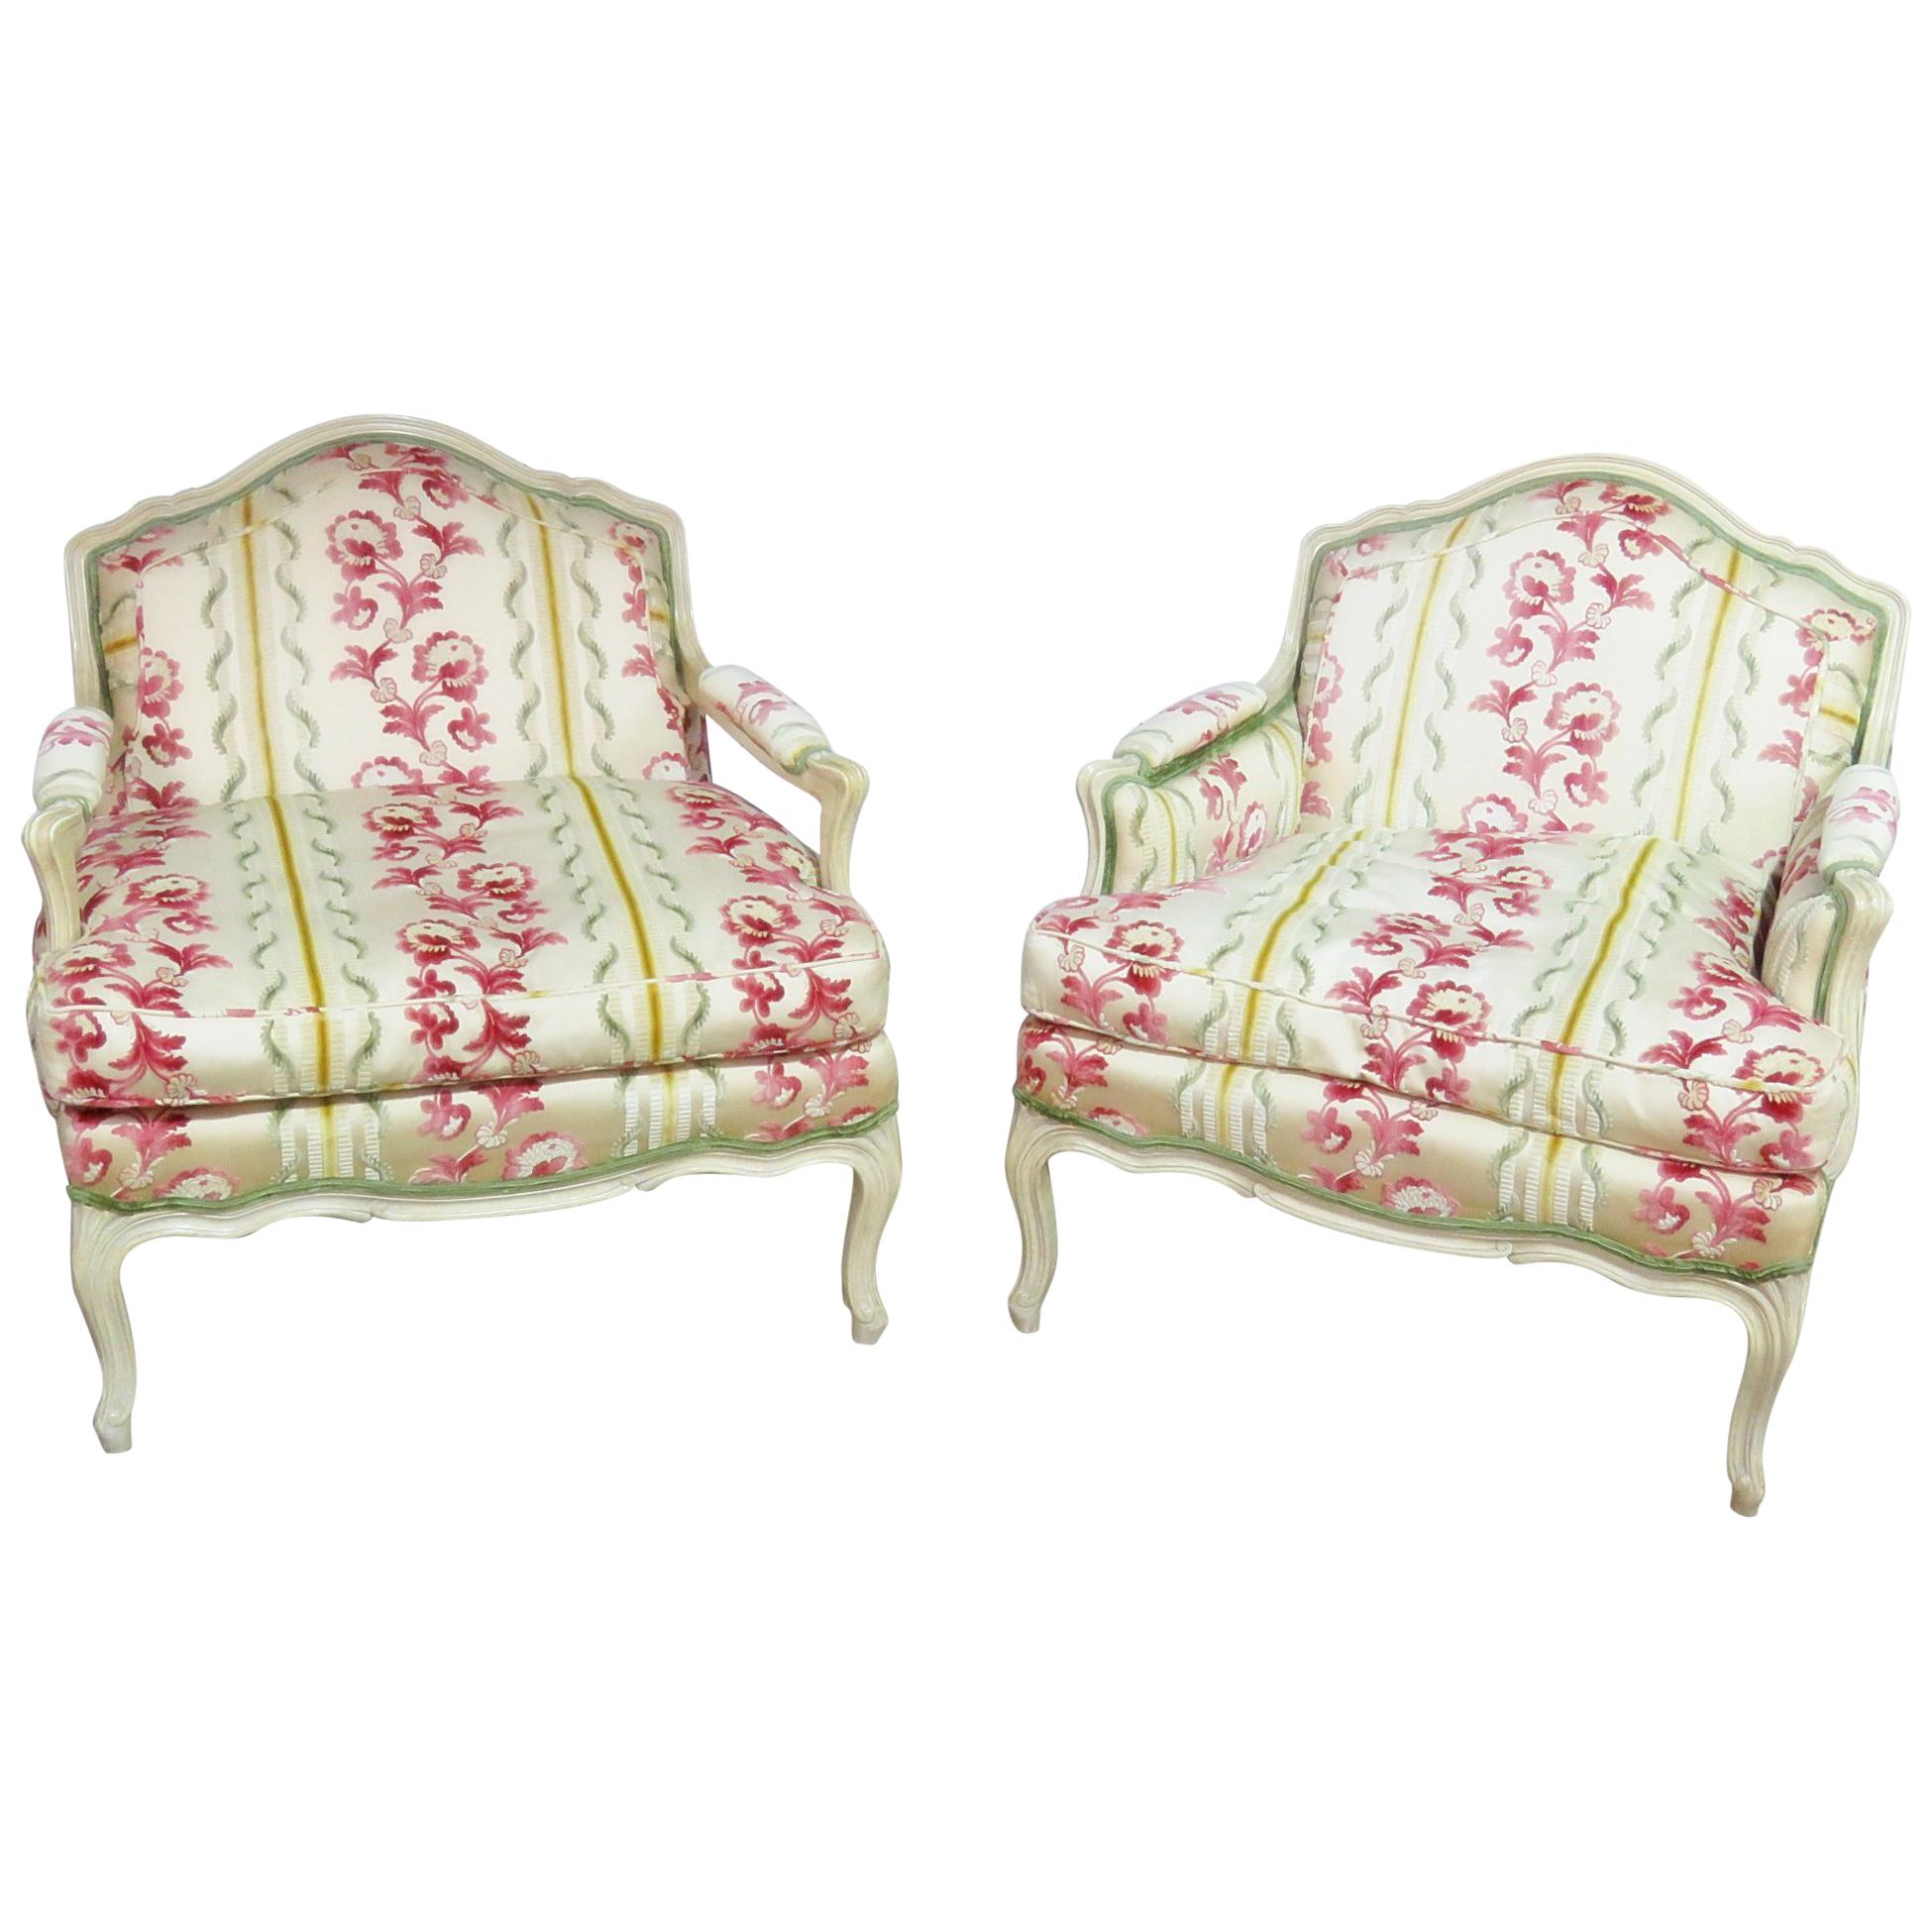 Companion Pair of Louis XV Style Chairs For Sale